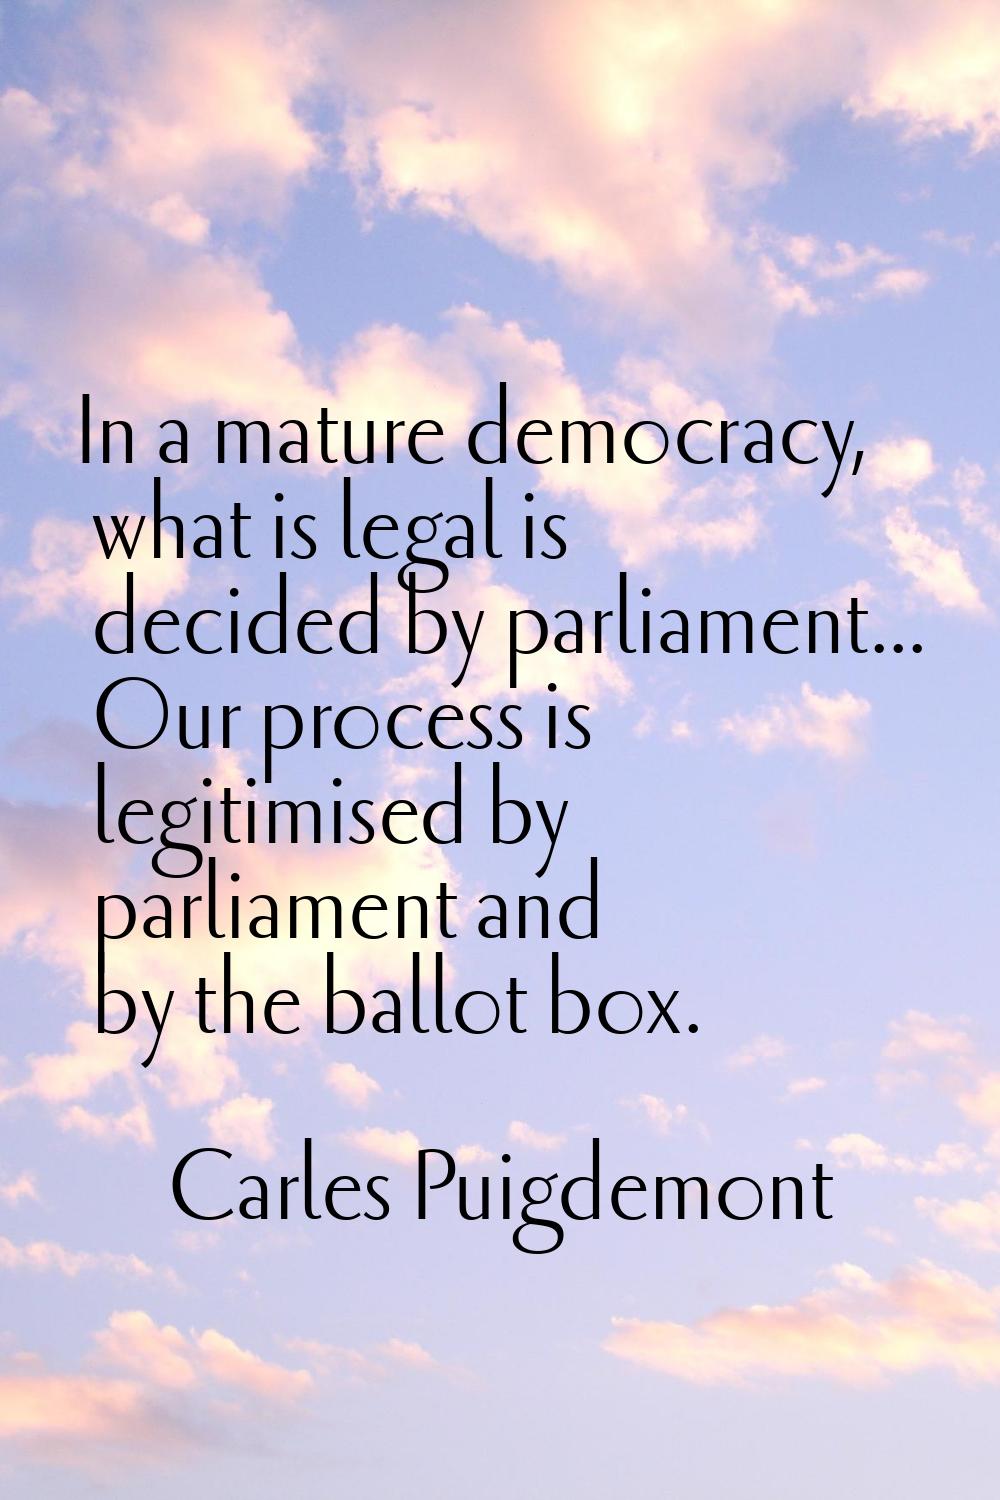 In a mature democracy, what is legal is decided by parliament... Our process is legitimised by parl